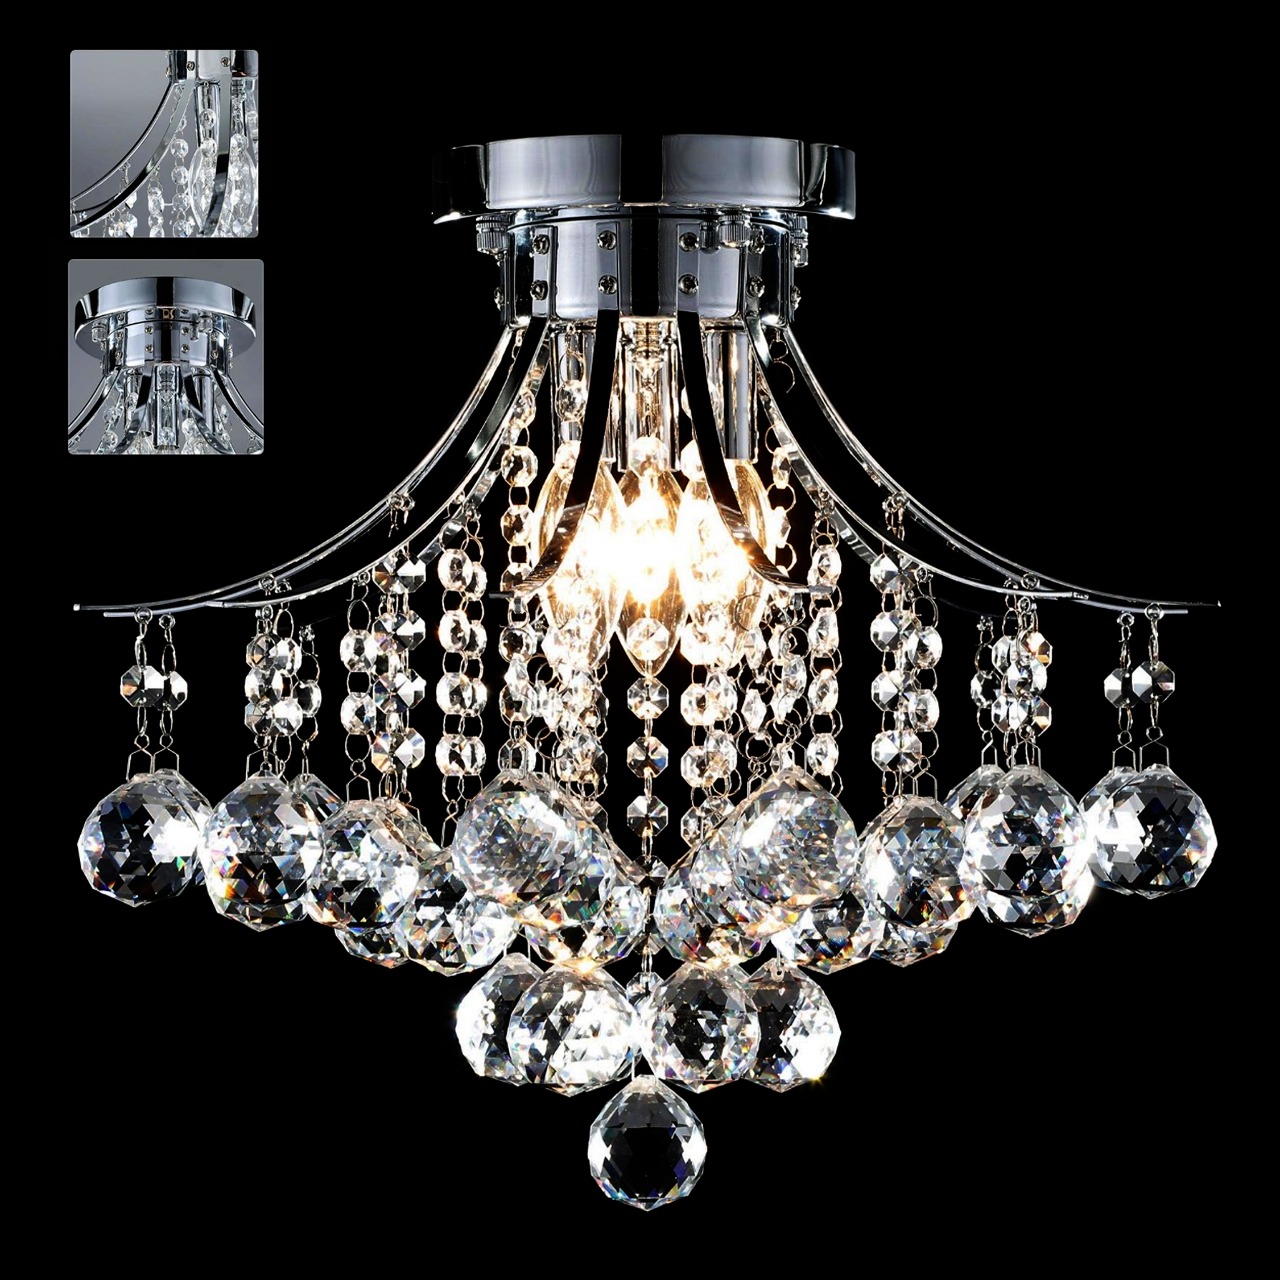 Crystal Chandelier with 3 lights Mini Style Flush Mount Ceiling Light Fixture